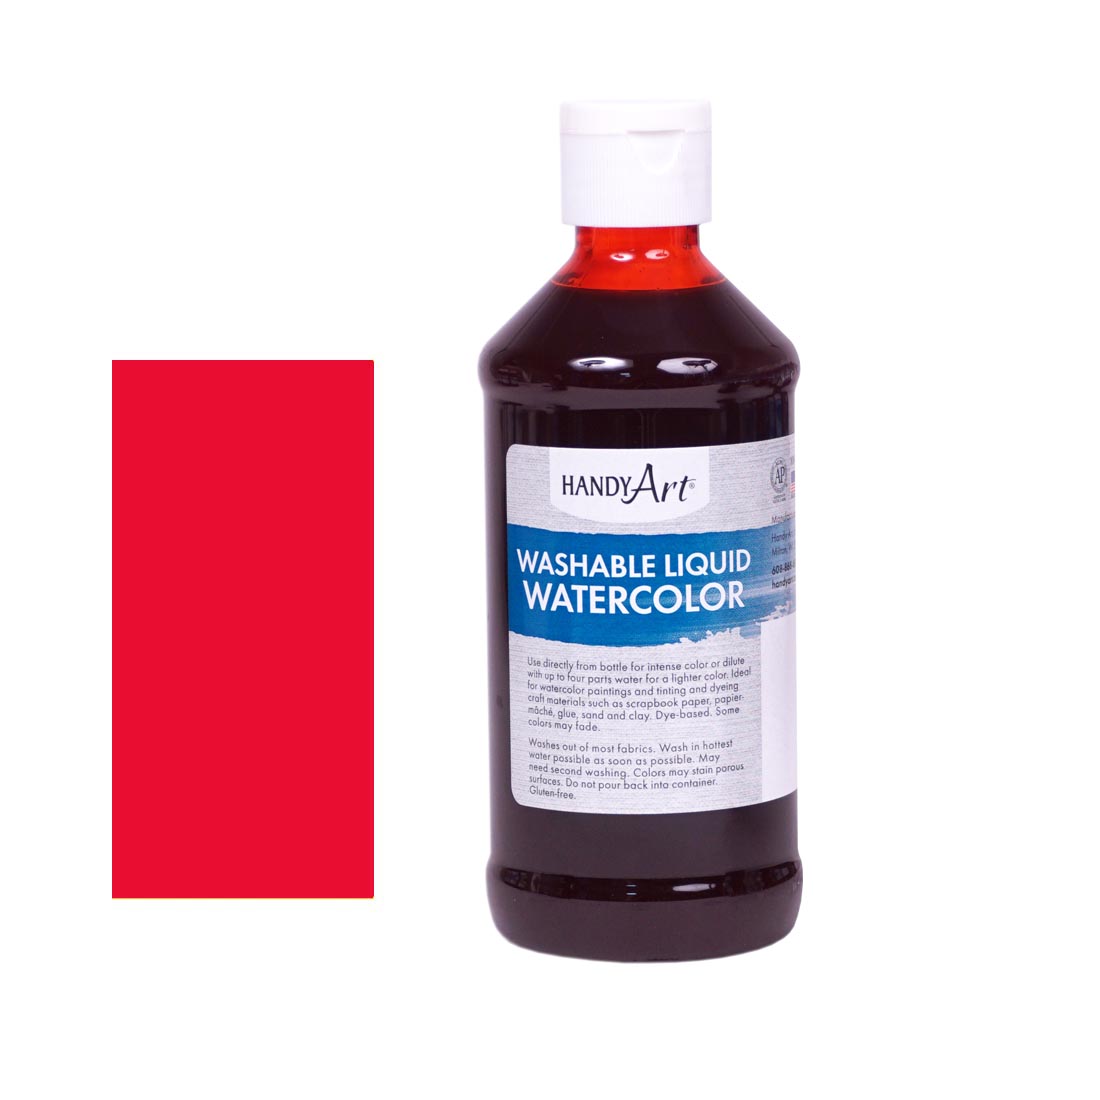 Bottle of Red Handy Art Washable Liquid Watercolor beside a rectangular color swatch